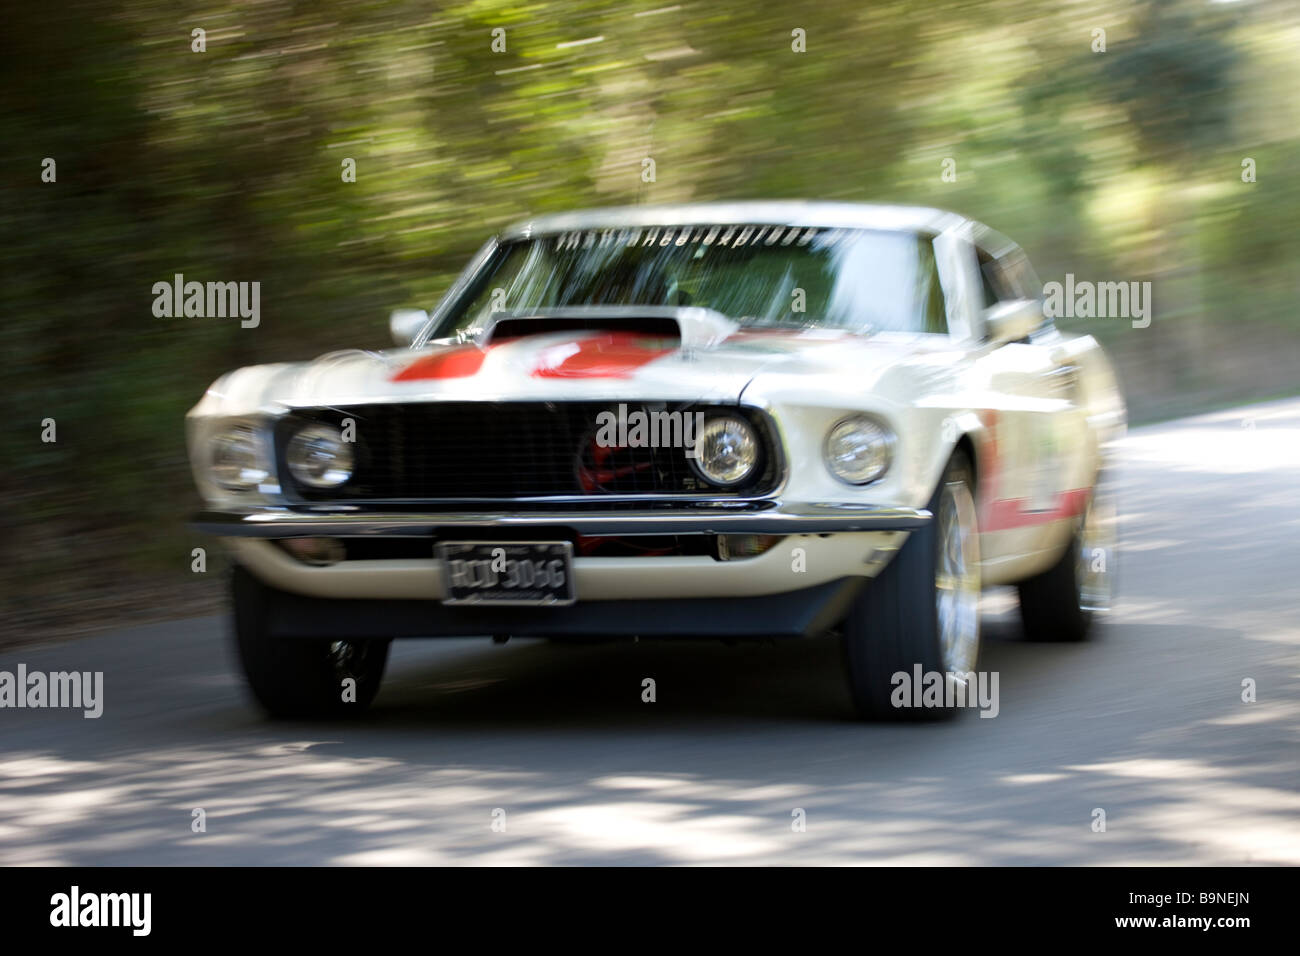 1969 Ford Mustang Mach 1 Stock Photo